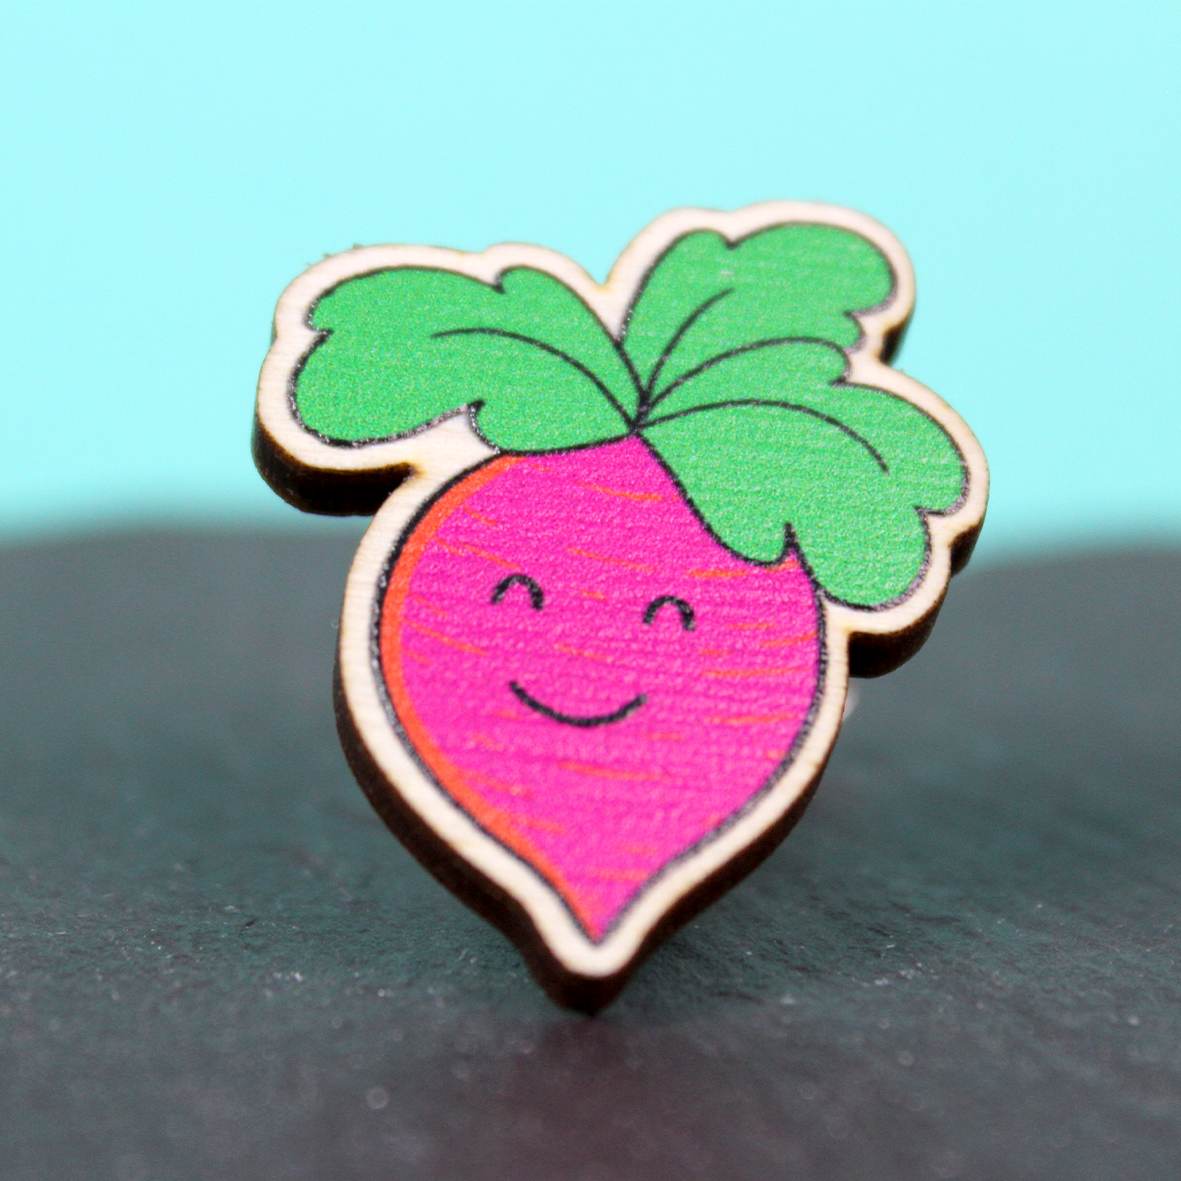 A wooden badge of a pink root vegetable with a smiling face and green leaf hair is shown against a piece of slate